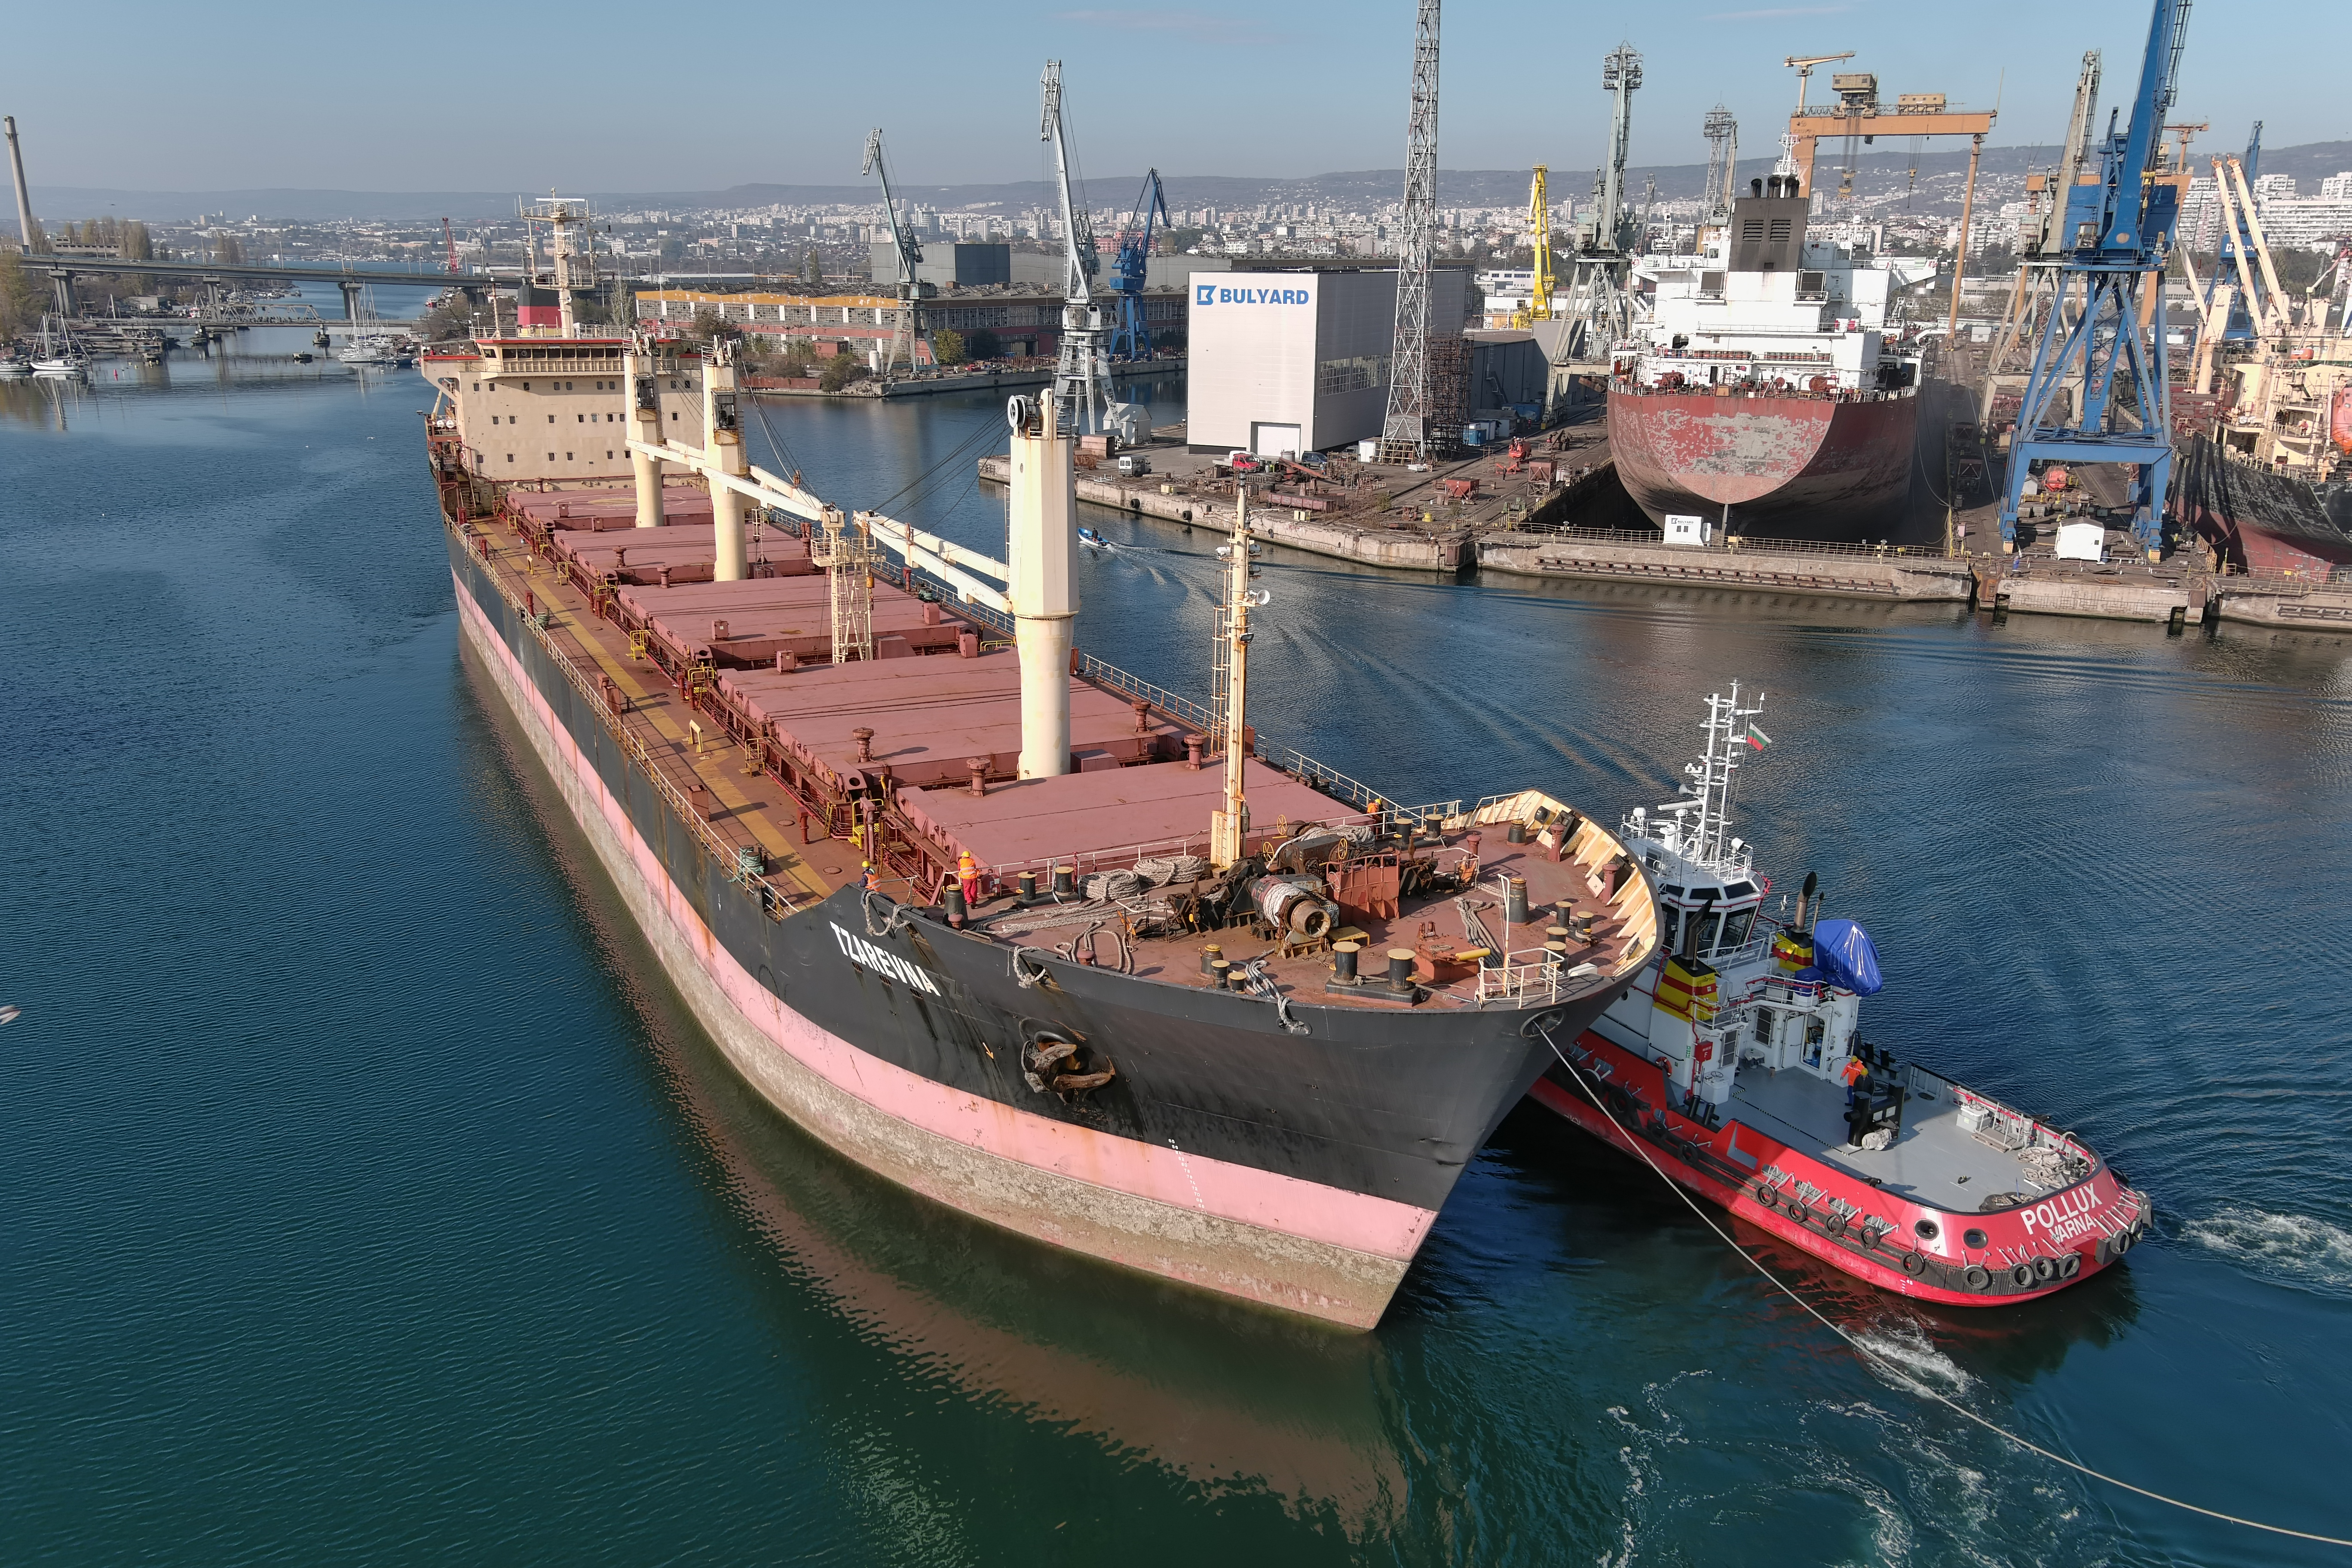 Bulgarian cargo ship ''Tsarevna'', which was blocked at the port of Mariupol, Ukraine, for more than 8 months, from Feb. 24, 2022, just arrived and docked in Bulgarain Black sea port Varna where the ship will be repired from gun and explosive damages. (Photo by Petar Petrov/Impact Press Group/NurPhoto)NO USE FRANCE